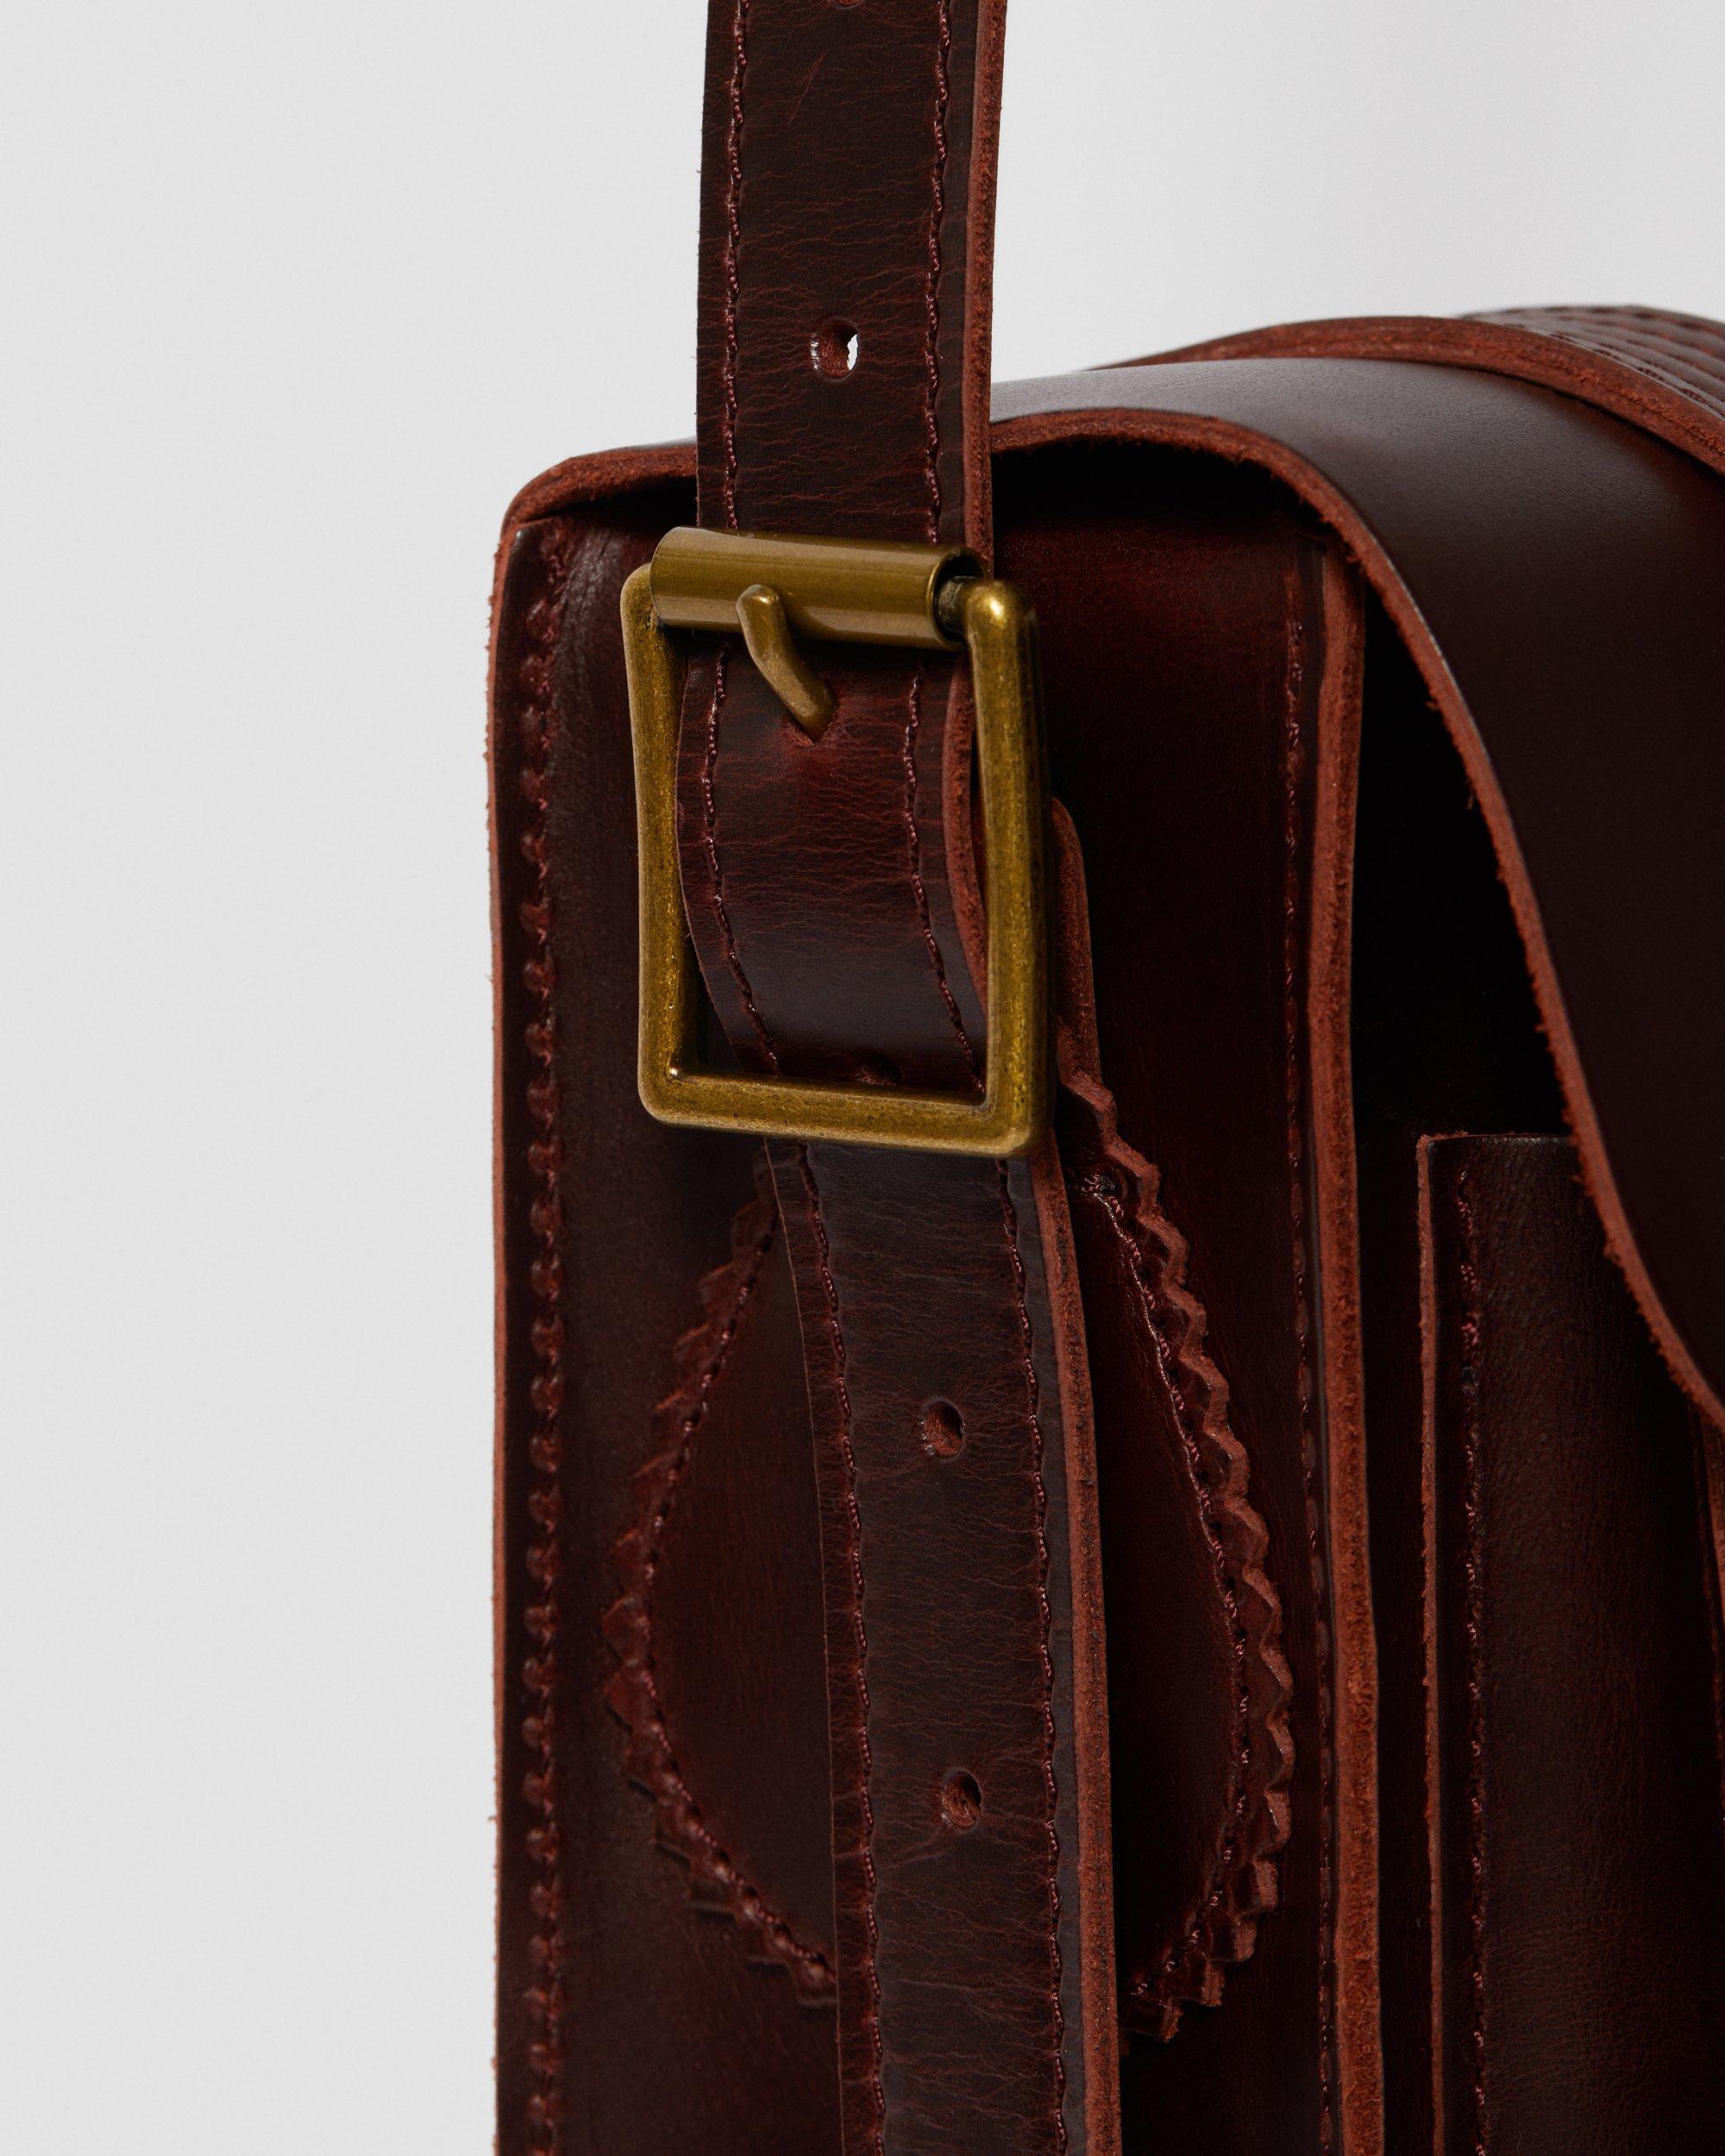 11 INCH LEATHER SATCHEL in Brown